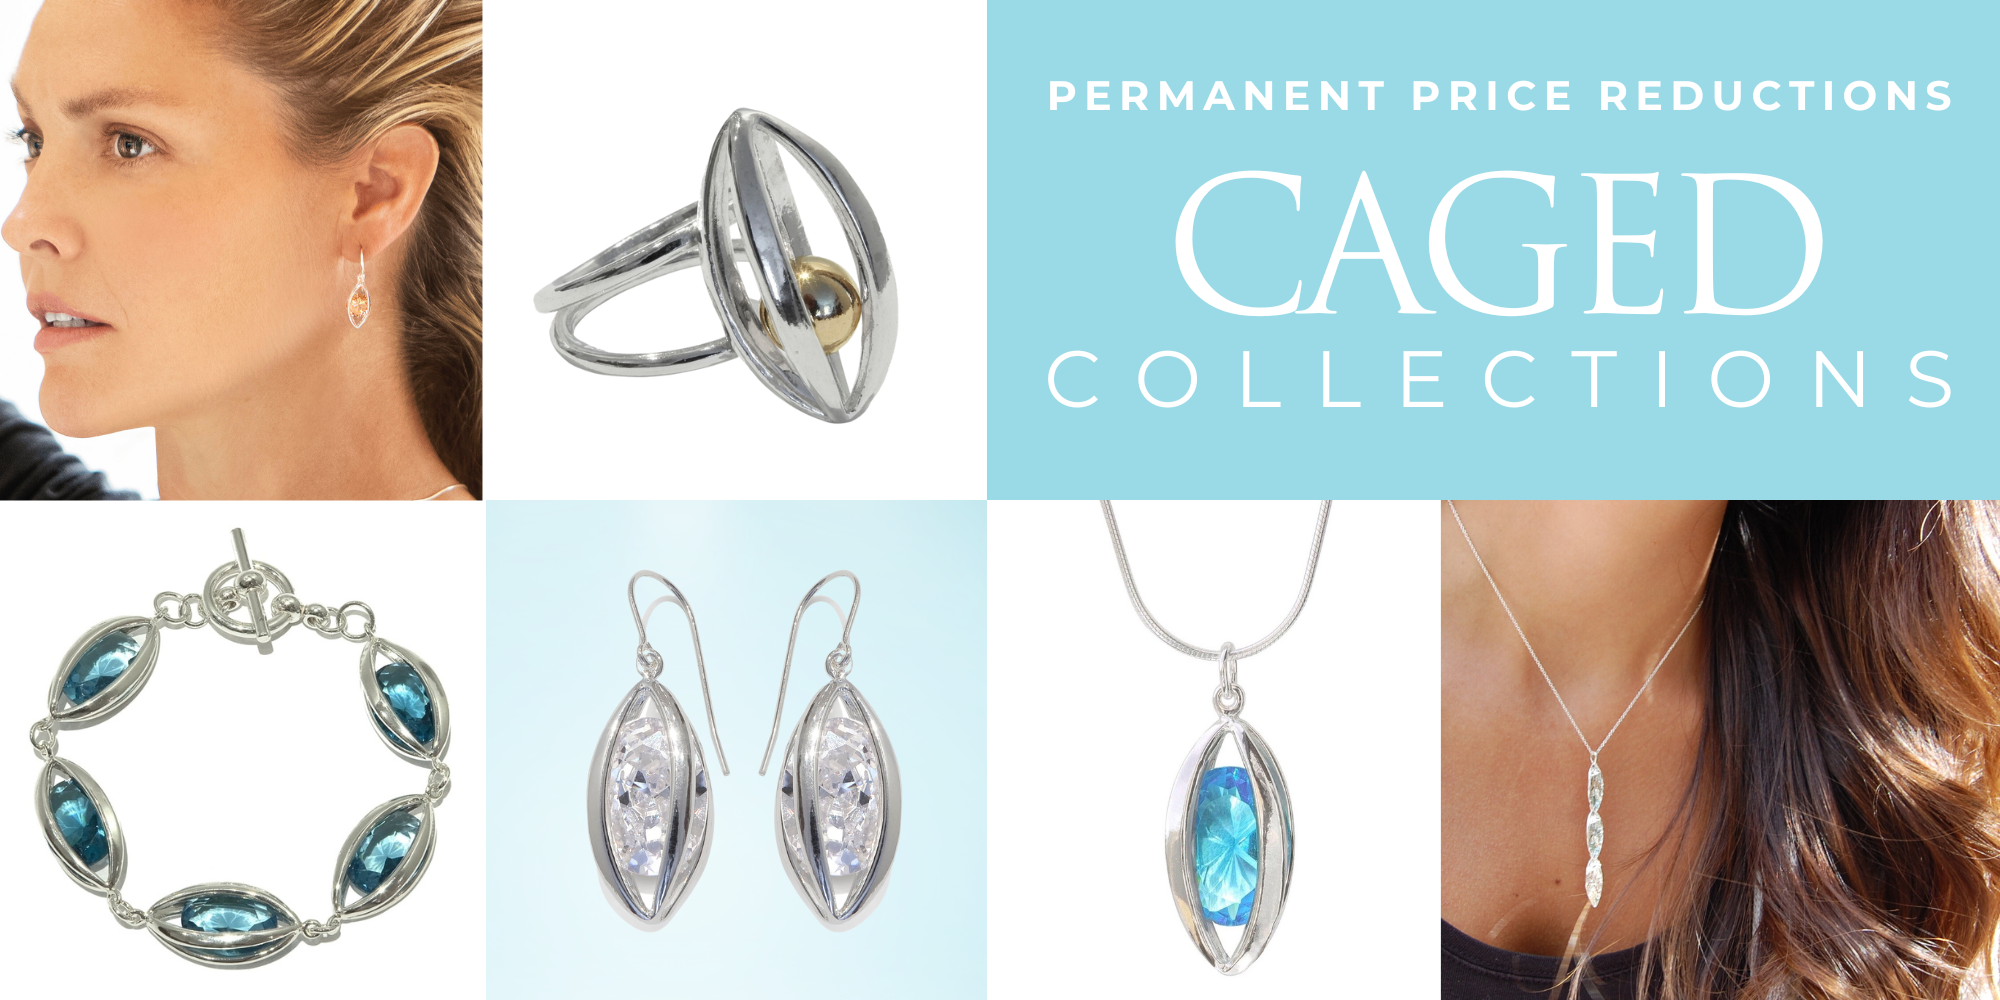 Caged Collections